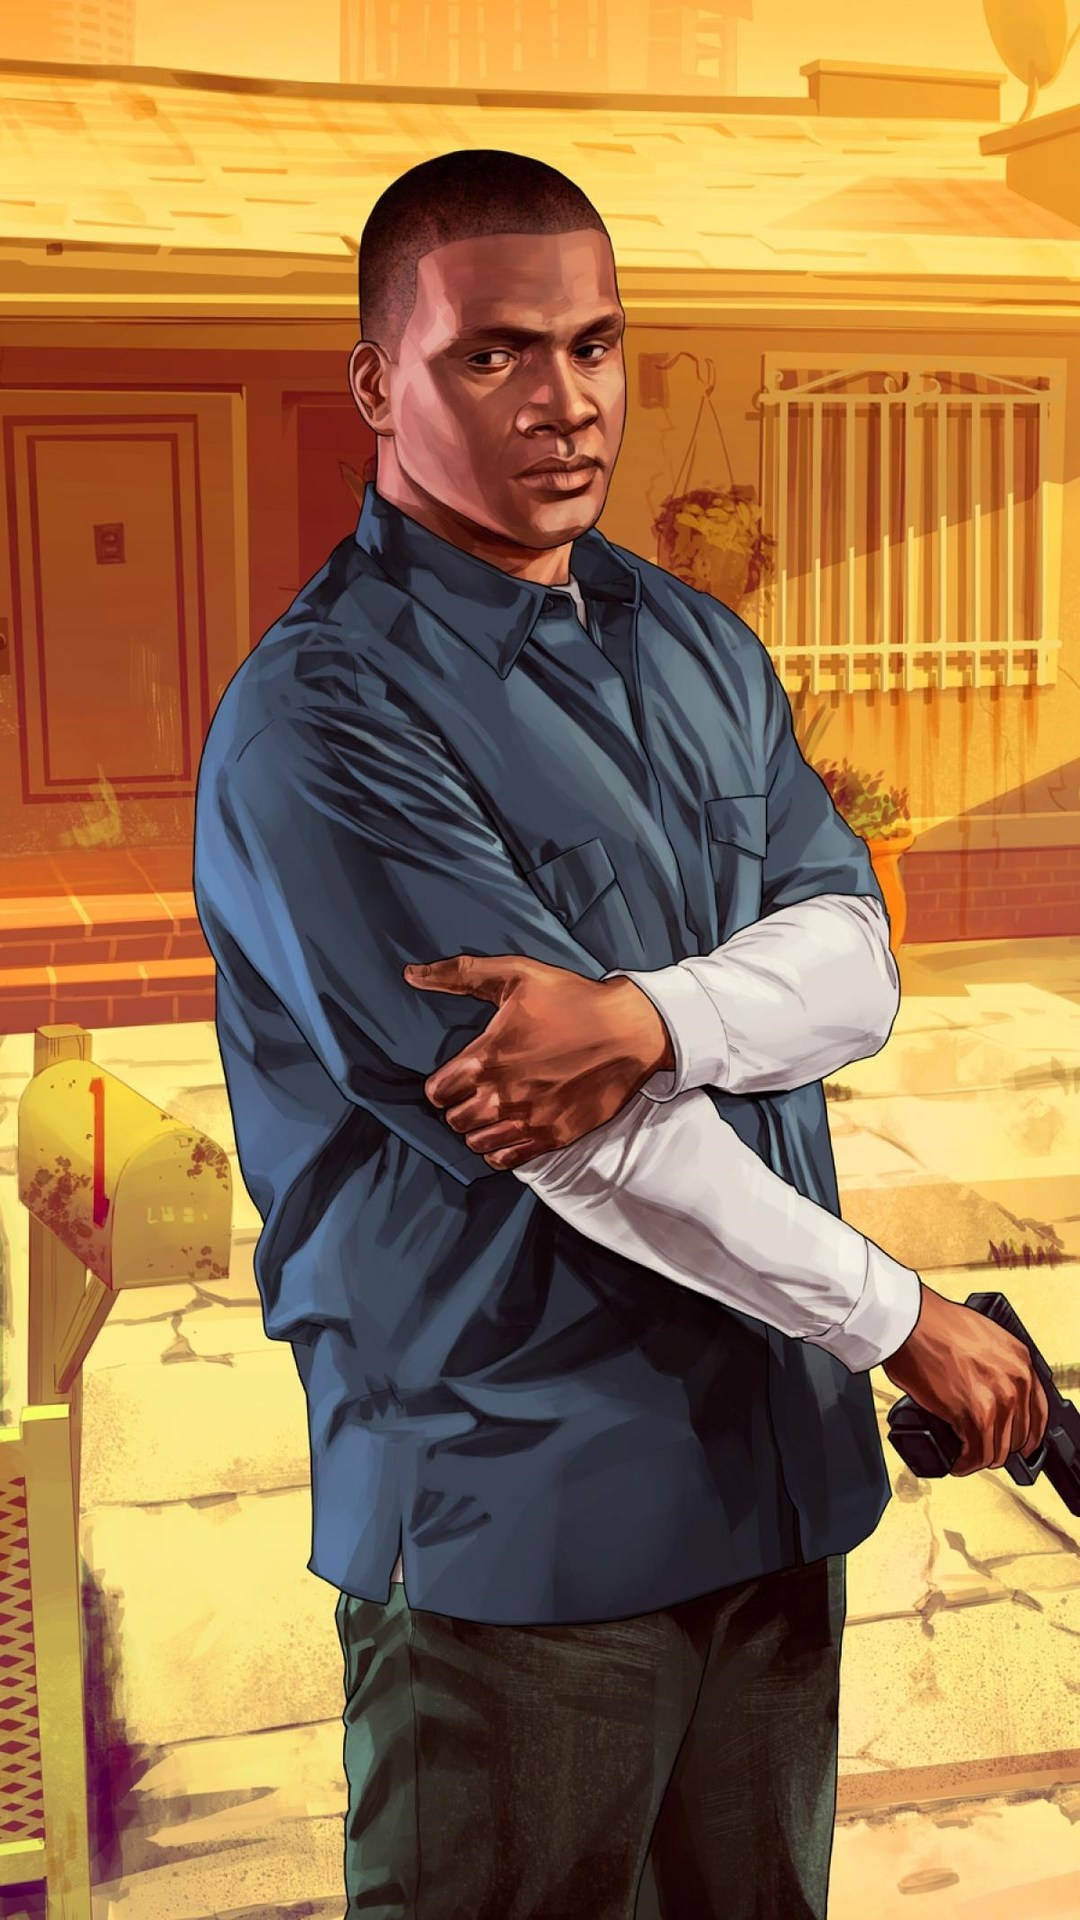 GTA 5 Now Available on iPhone Wallpaper